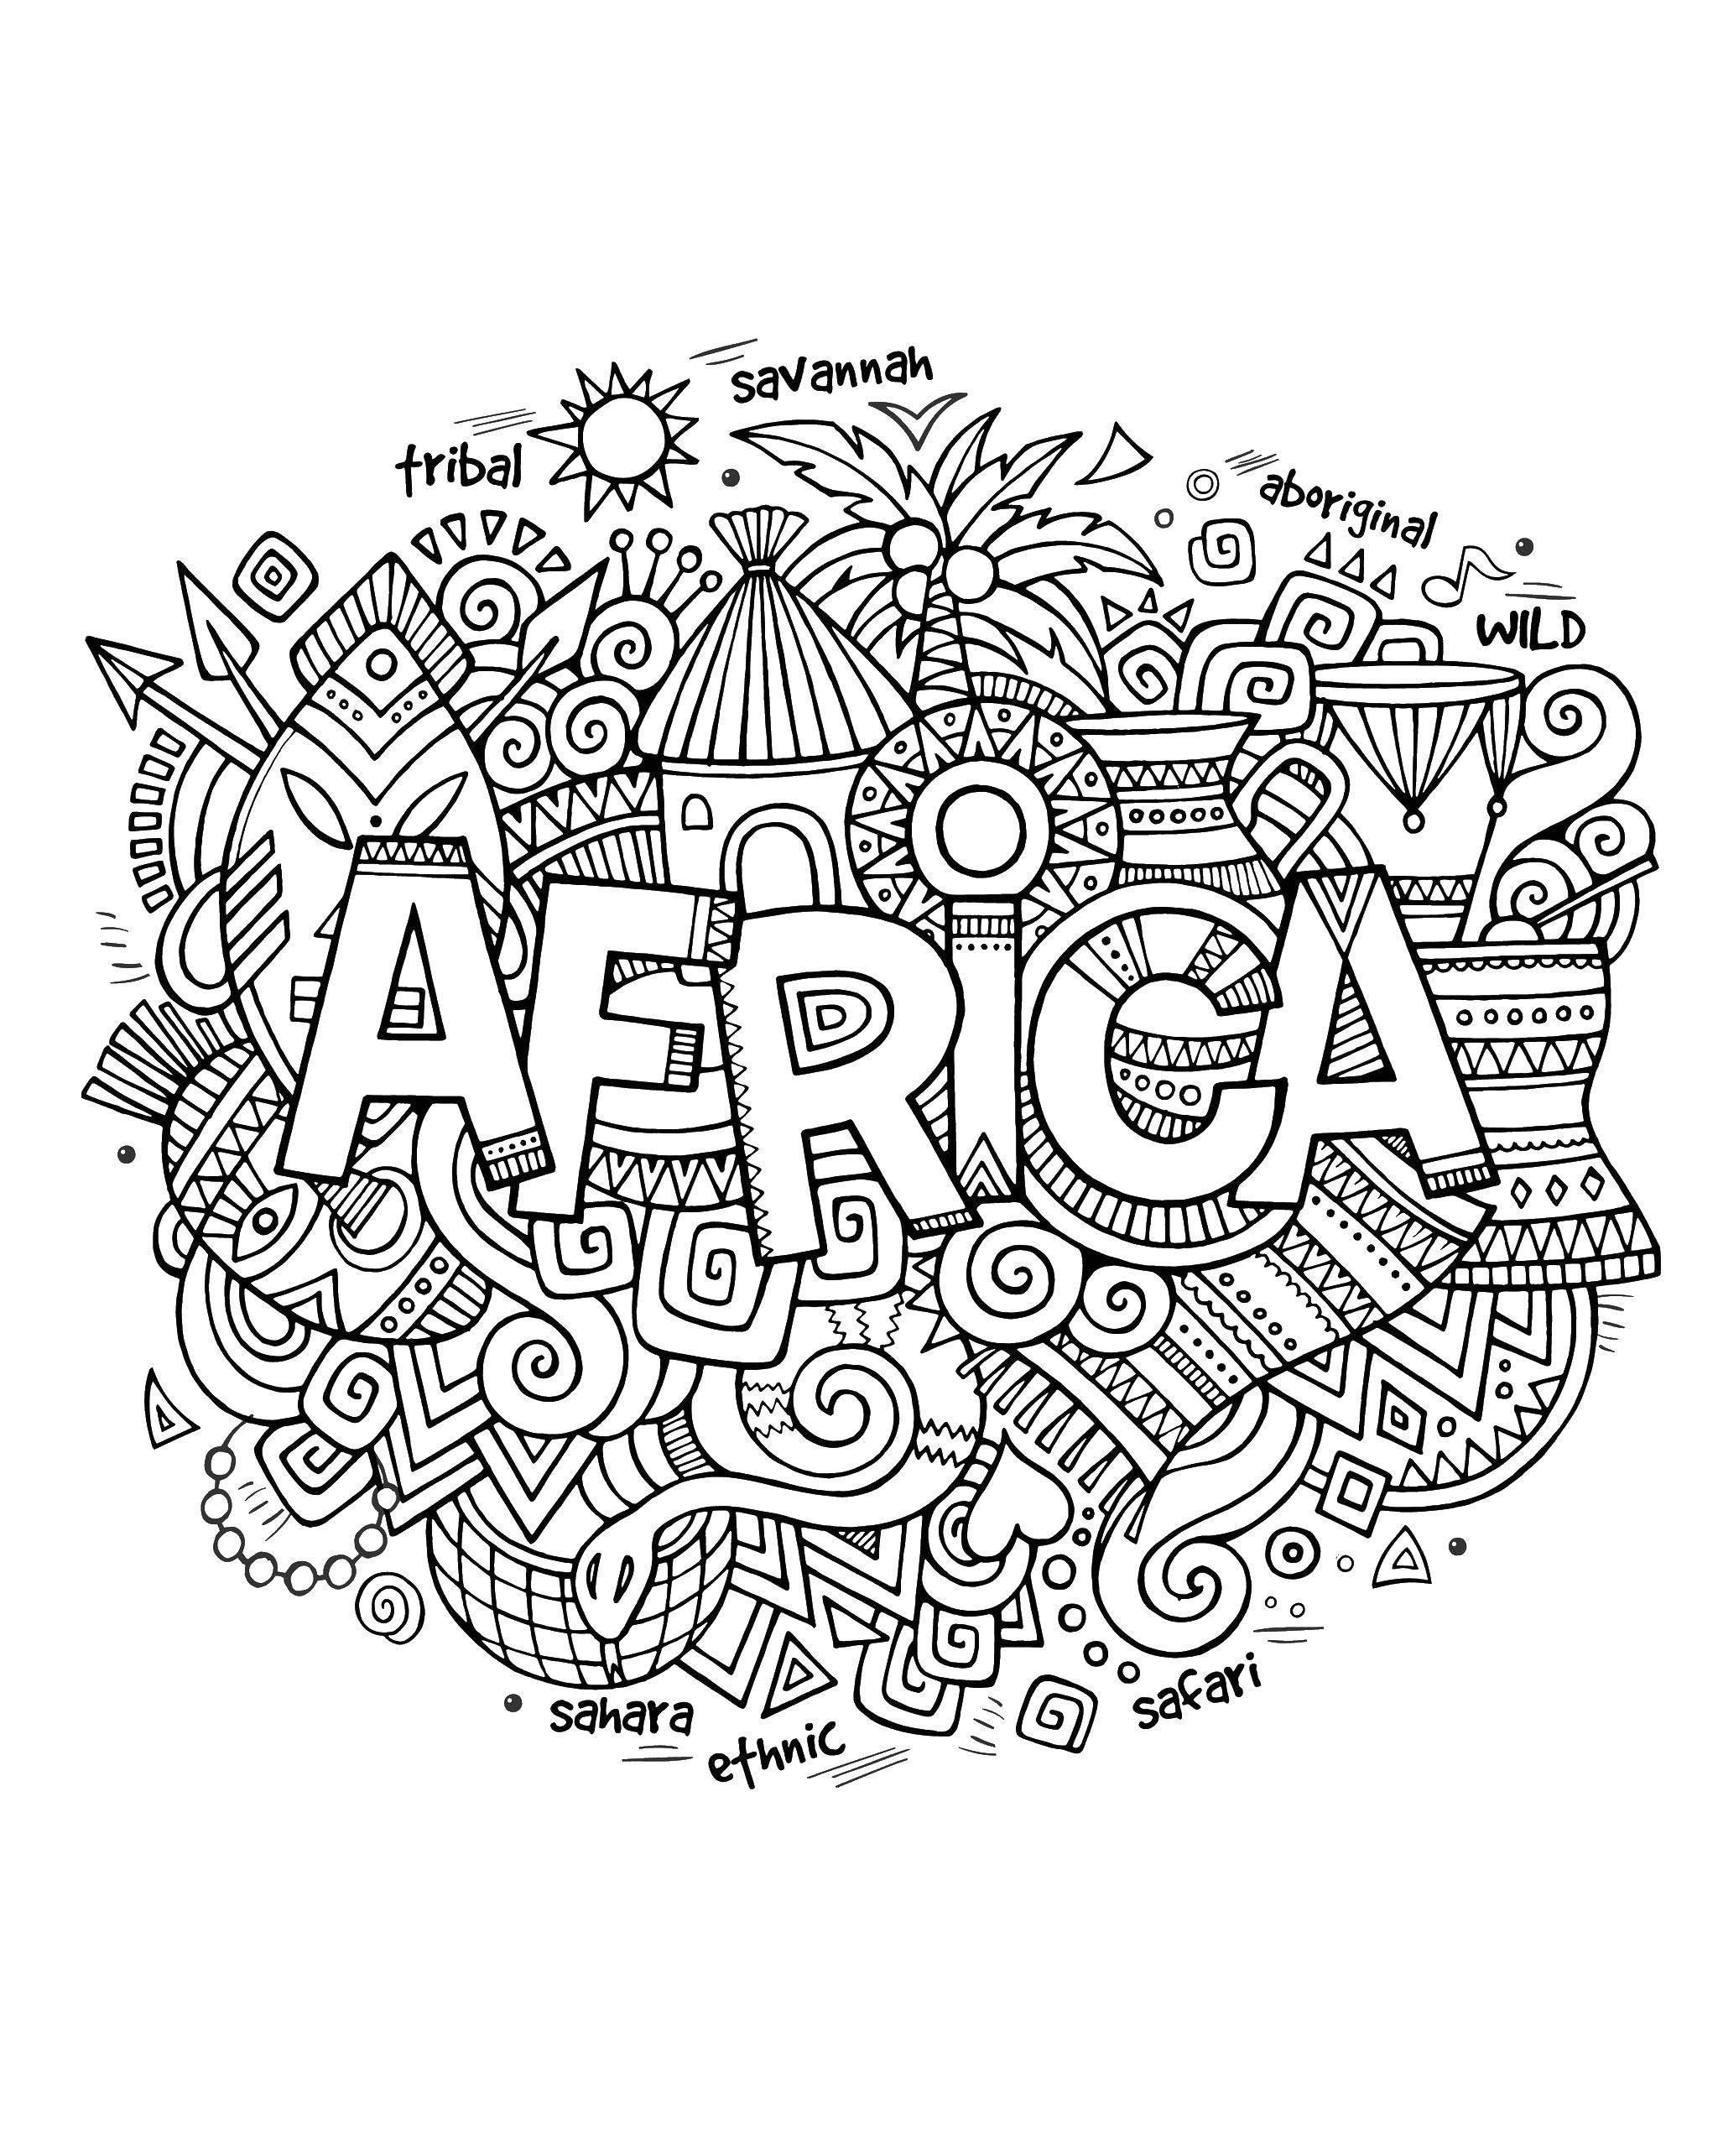 Coloring Africa. Category Africa. Tags:  countries, Africa, patterns.